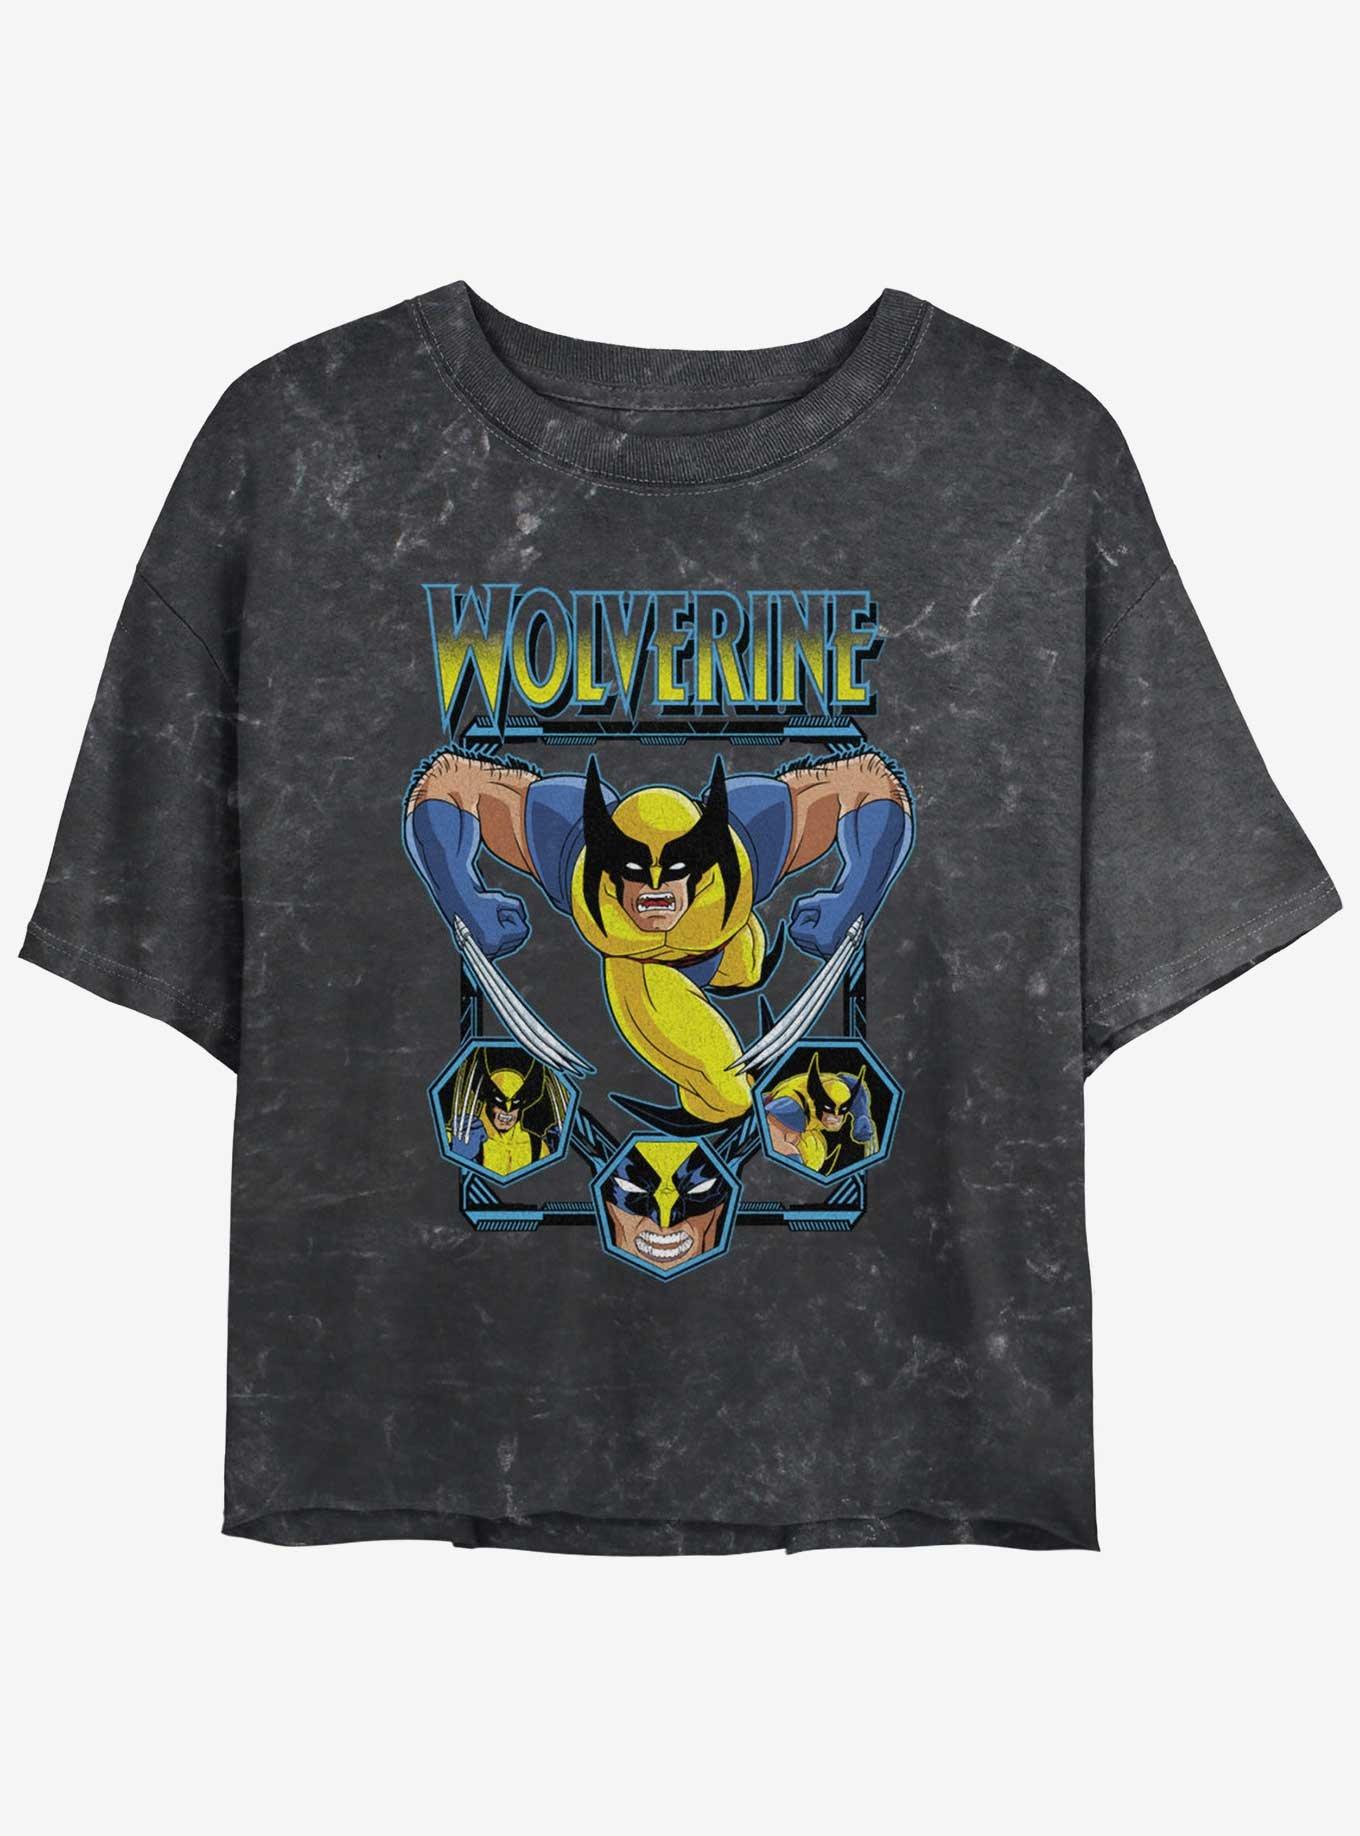 Wolverine Animated Attack Womens Mineral Wash Crop T-Shirt, BLACK, hi-res